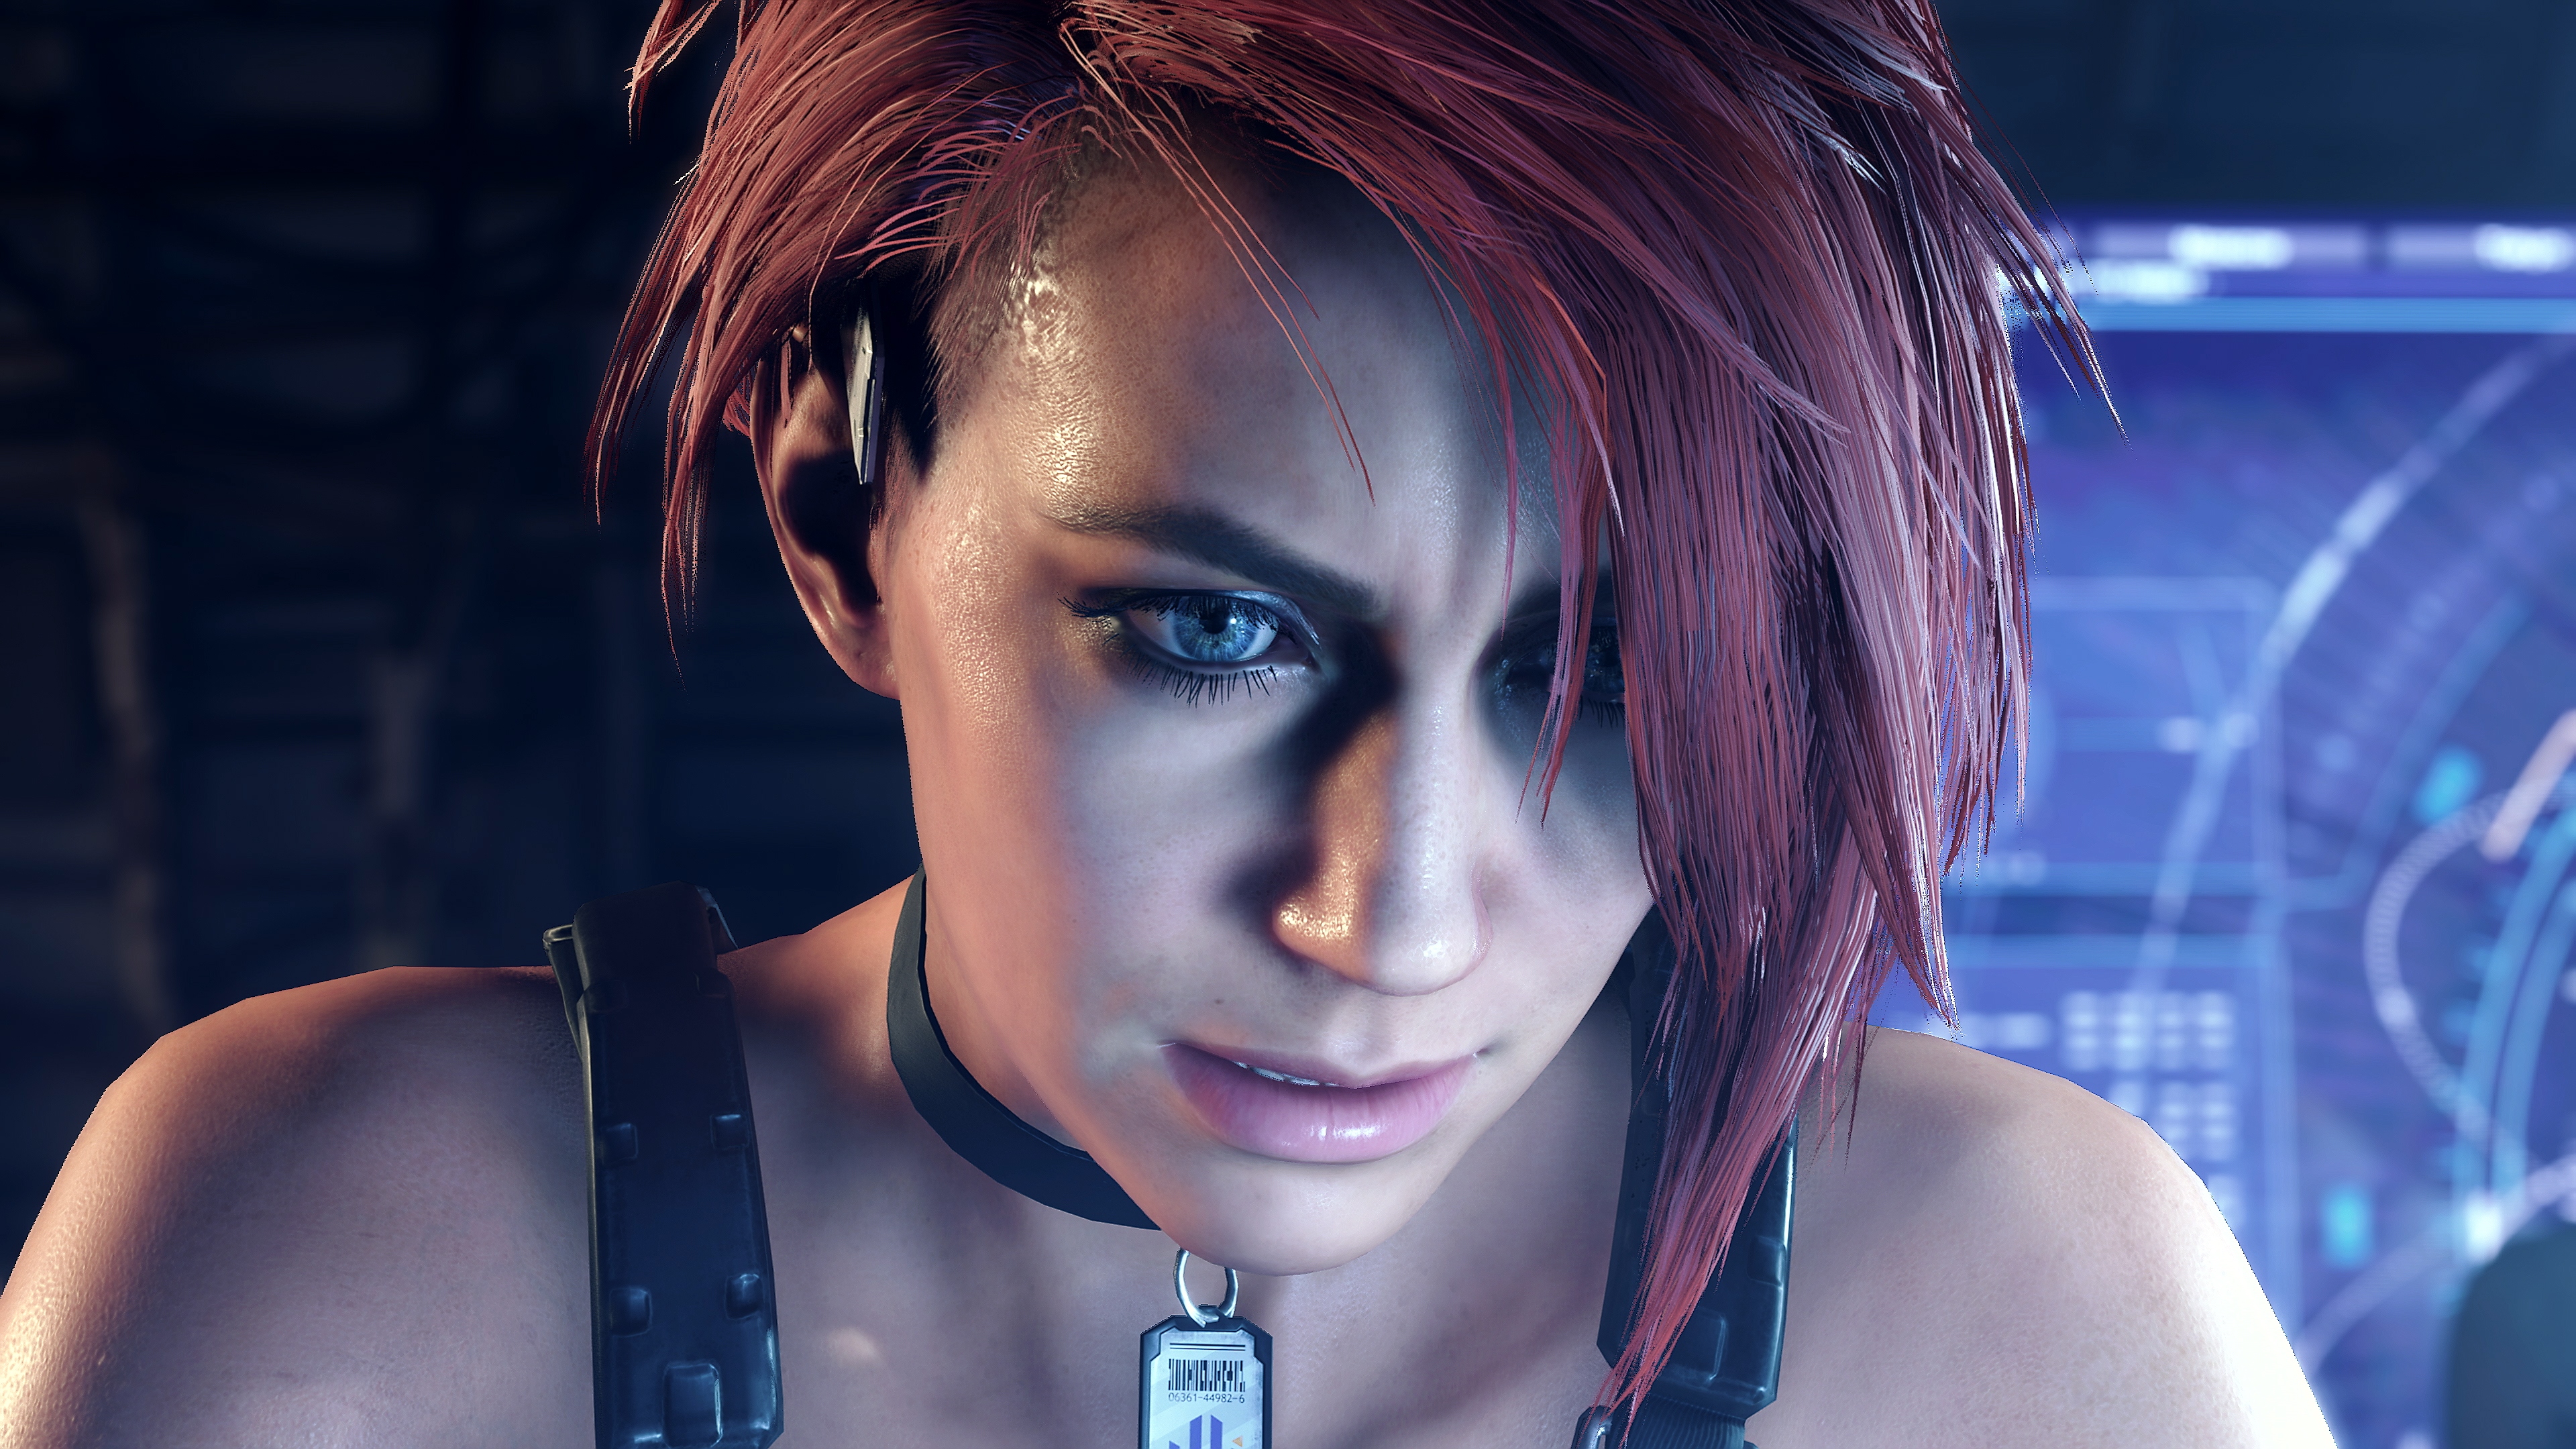 Exoprimal screenshot - close up image of character with red hair